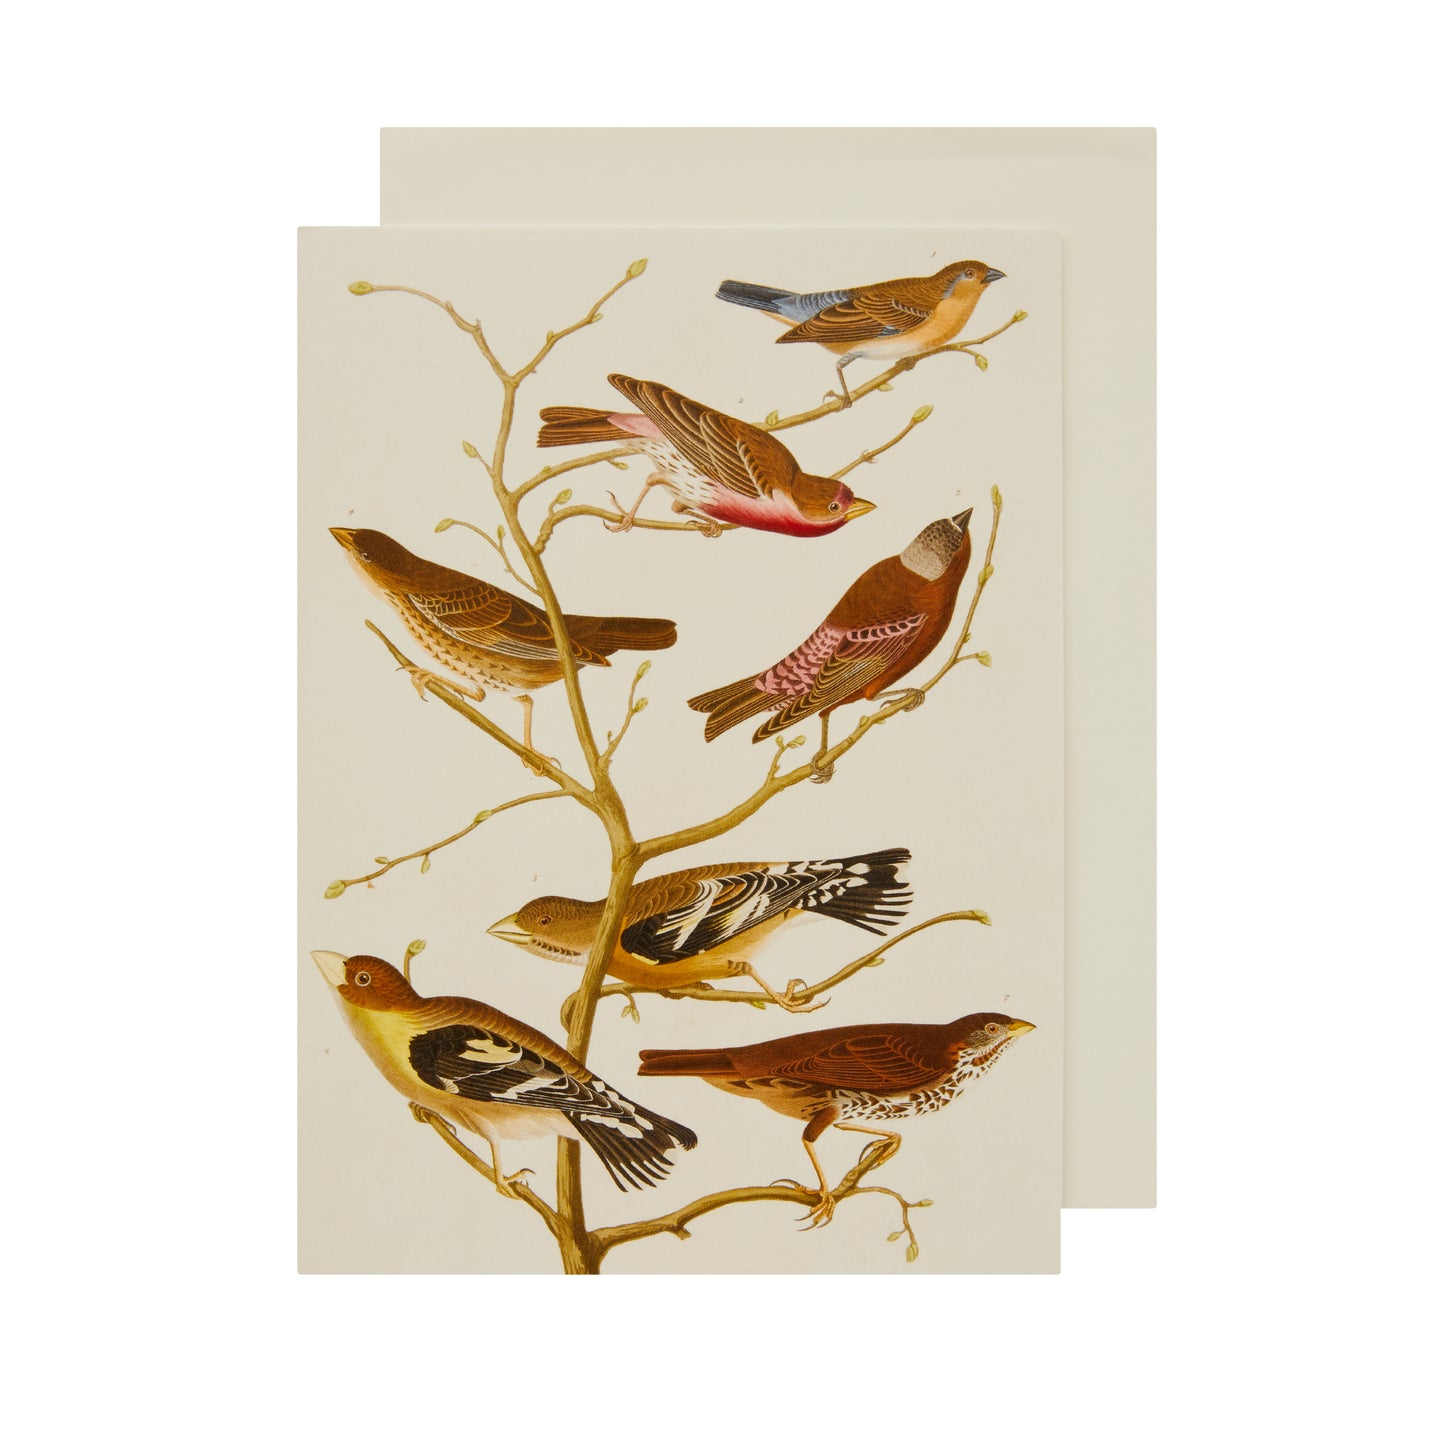 Greeting card - A Group of Finches by John James Audubon. Seven finch species on a bough, against a white background. Brought to you by CuratingCambridge.co.uk